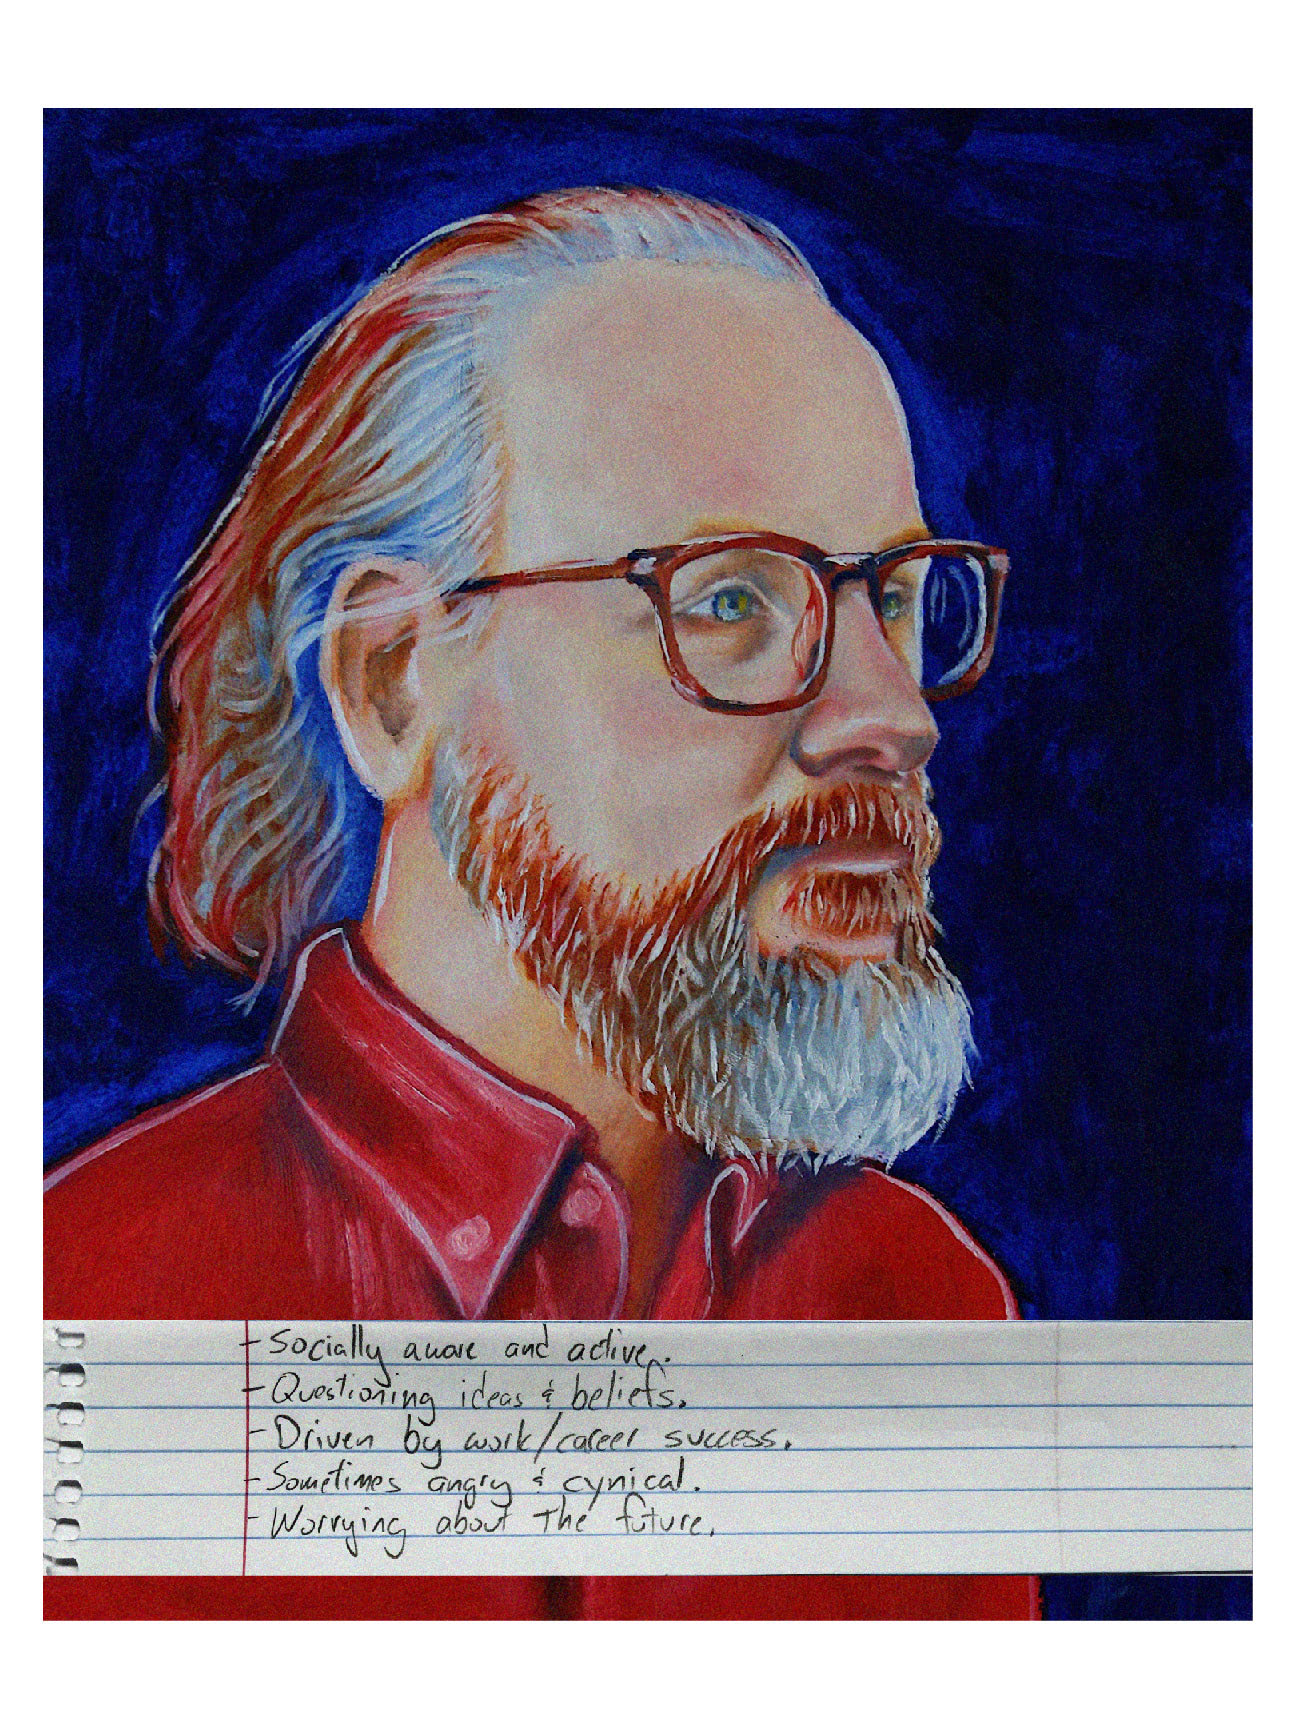 A painting of my dad, a man with a red beard and glasses, looking off to the right with a determined look in his eyes.